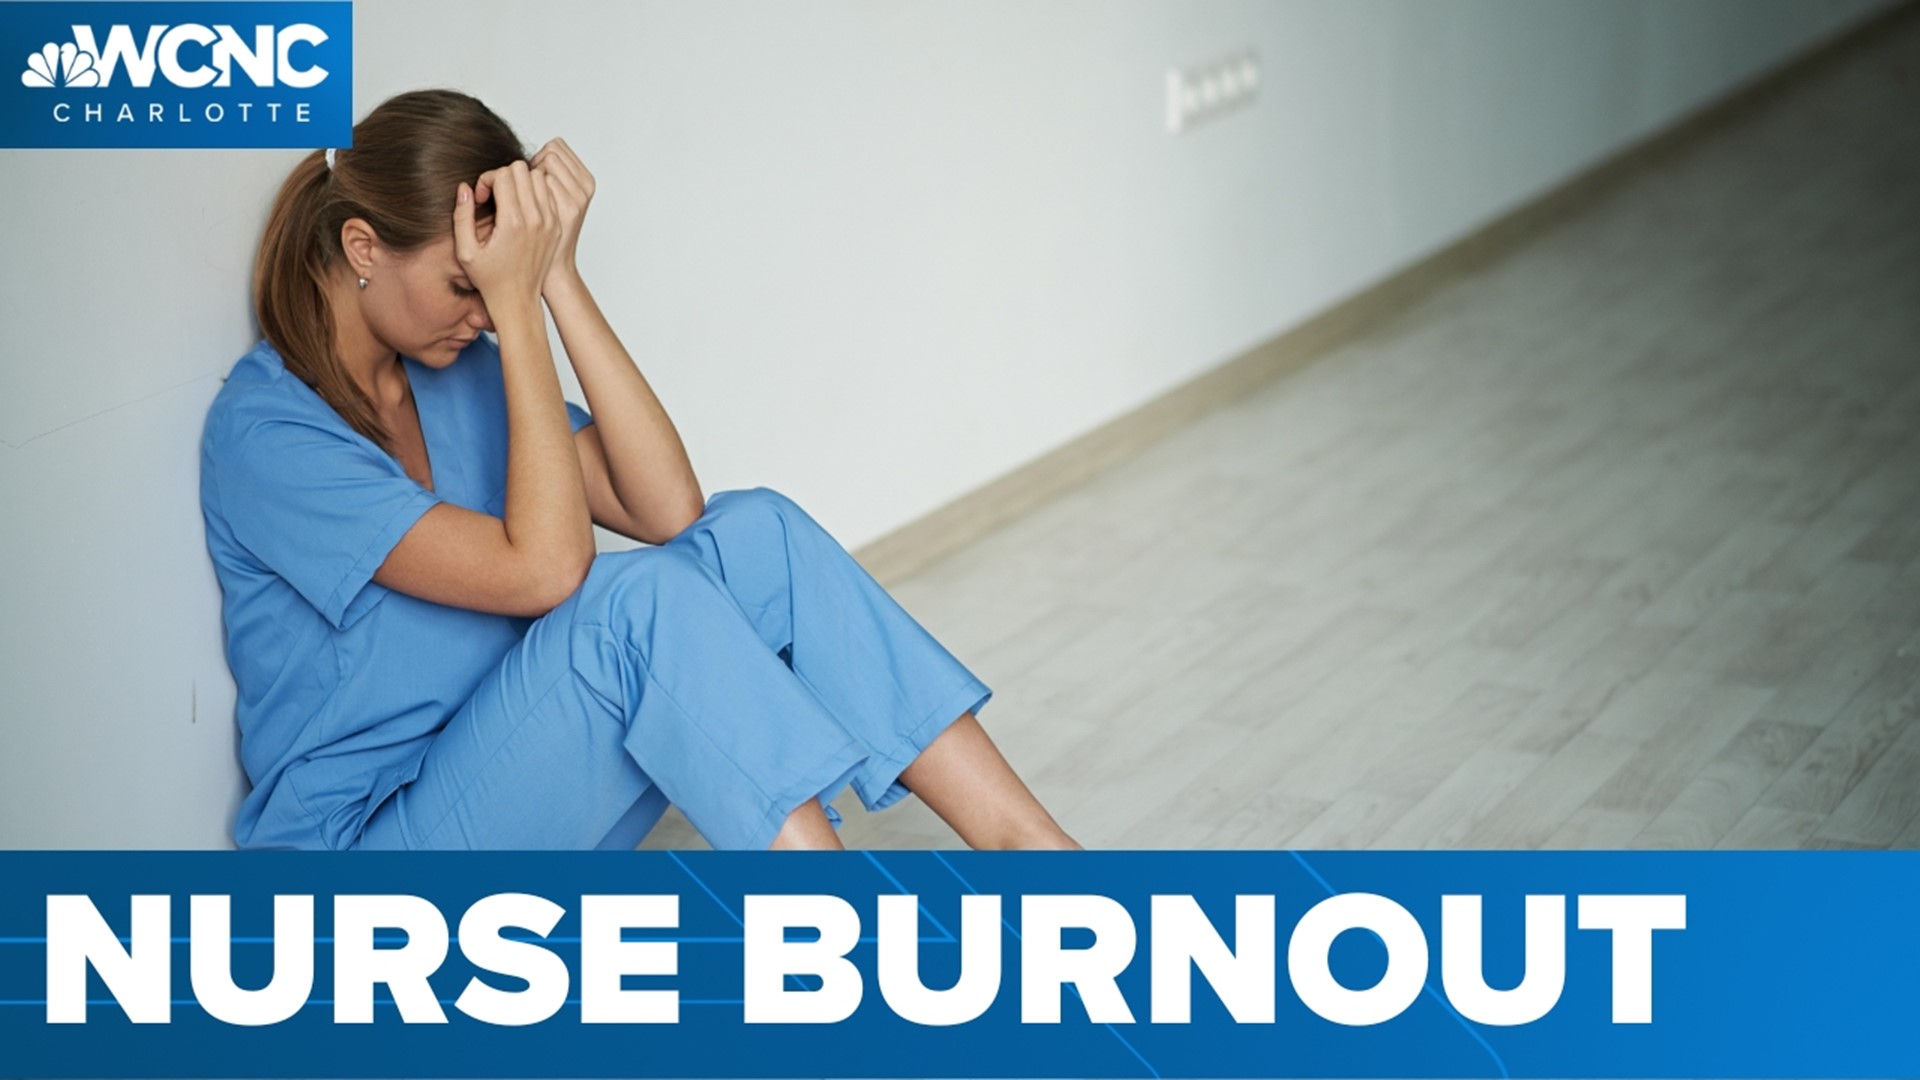 As more and more nurses leave the job, others have to pick up extra hours, accelerating burnout and frustration, and eventually worsening the existing shortage.